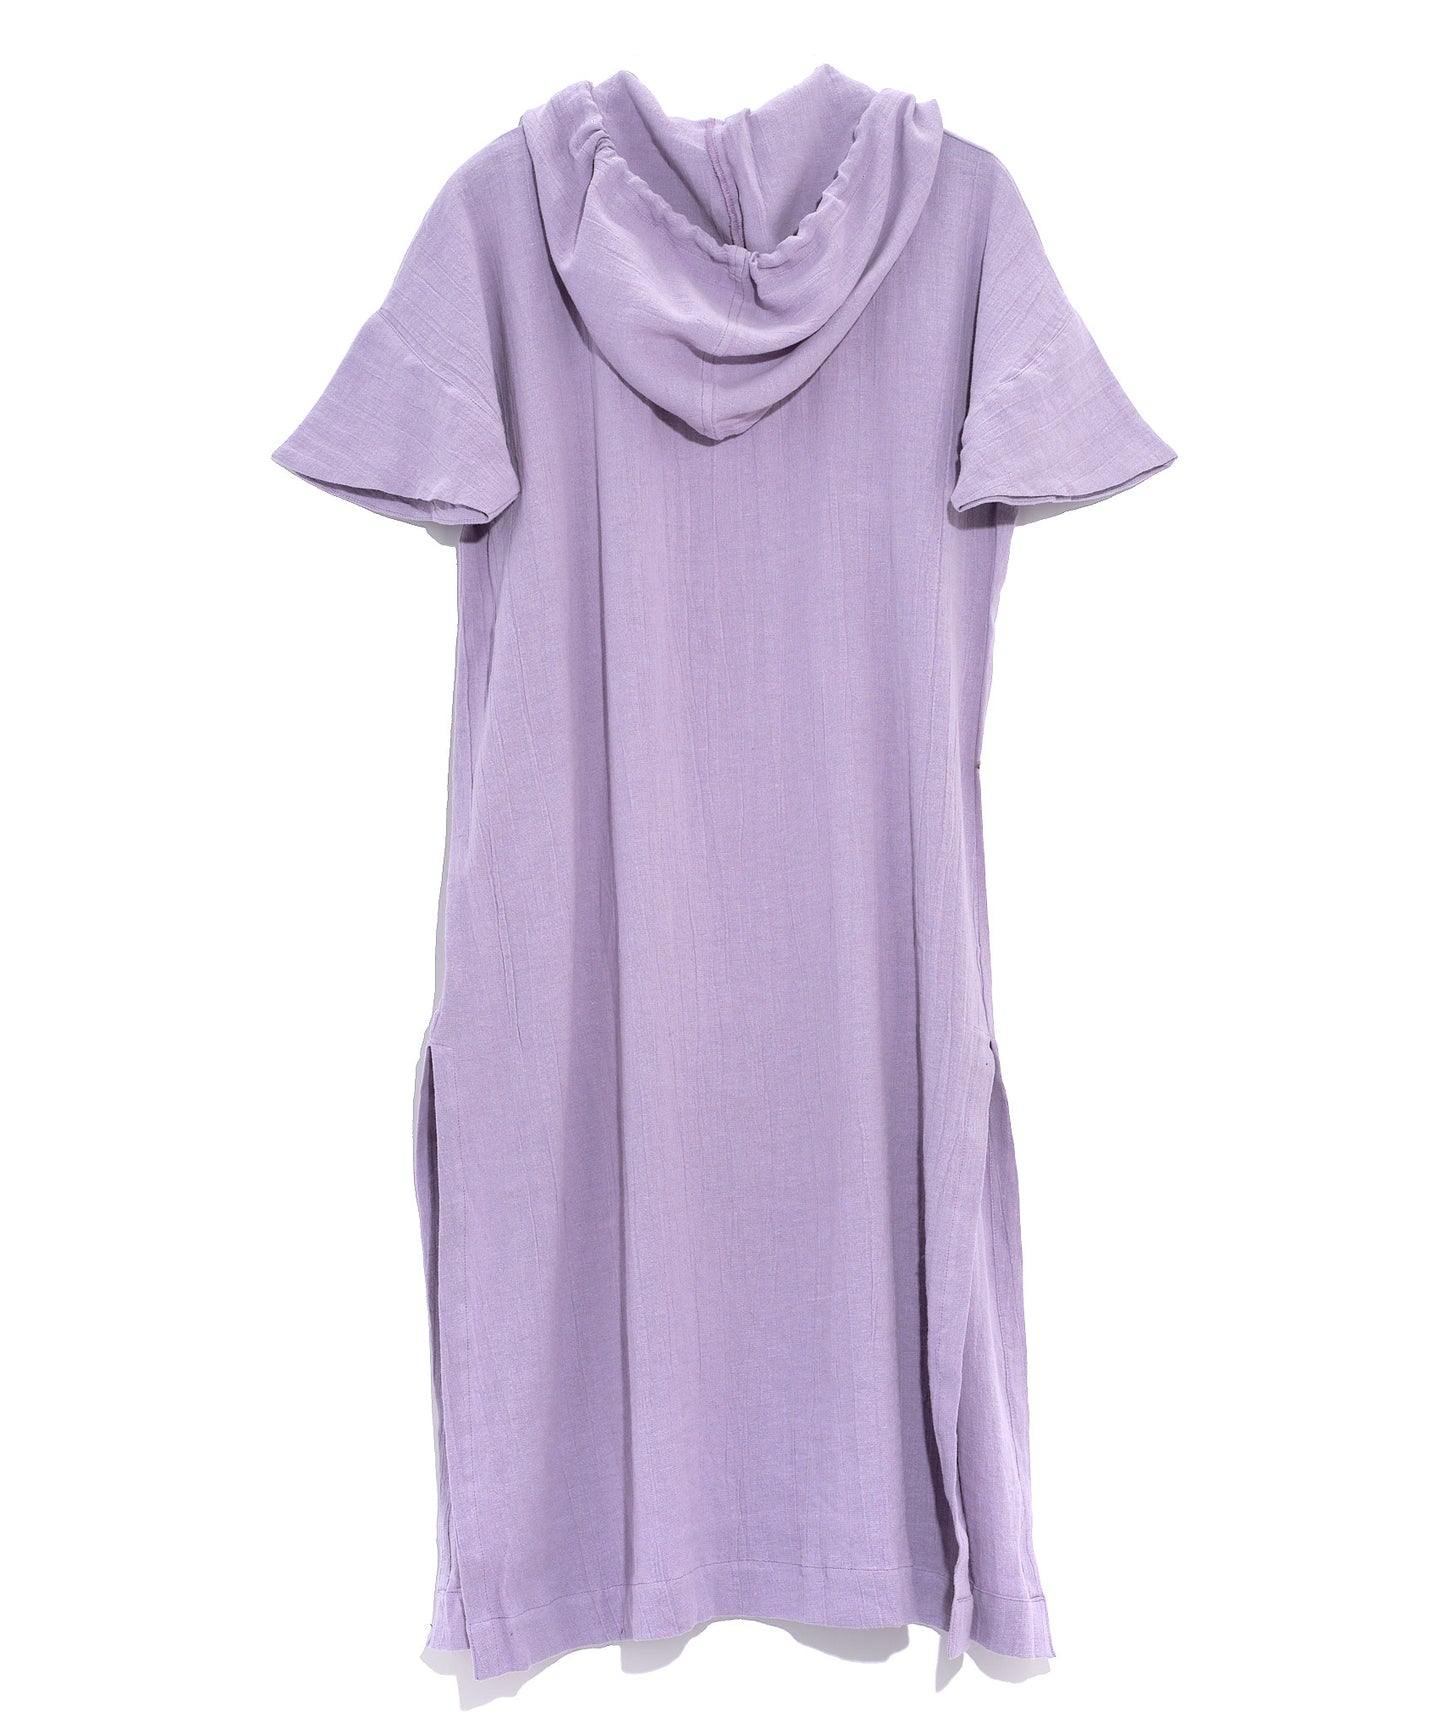 Cotton Linen Meridian Hooded Swim Cover-Up